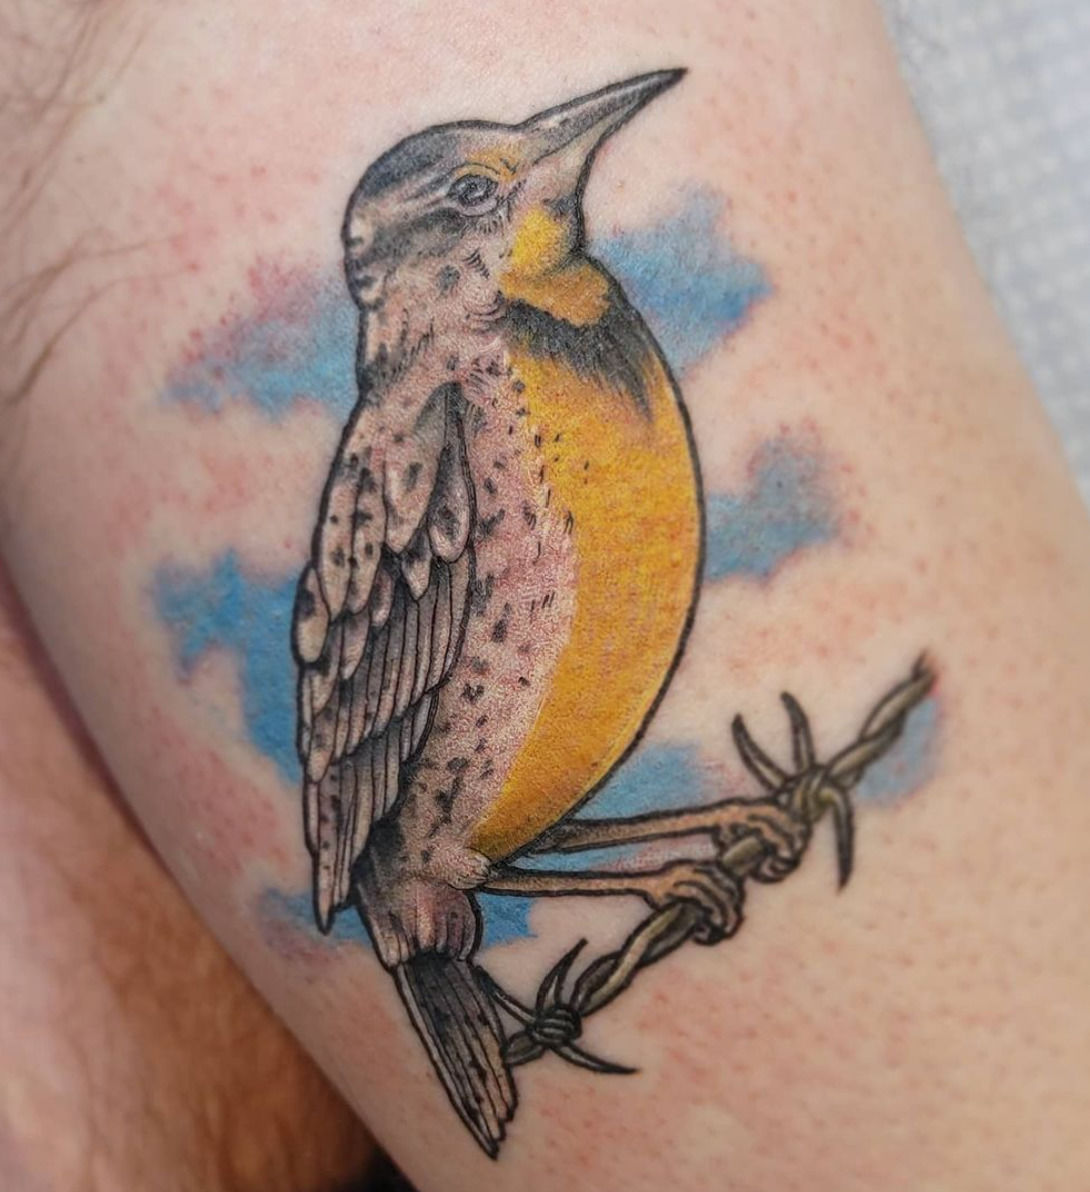 Wonderland Tattoo on Instagram A Western Meadowlark with Oregon Grape and  all the colors Done by ceceliatat2 